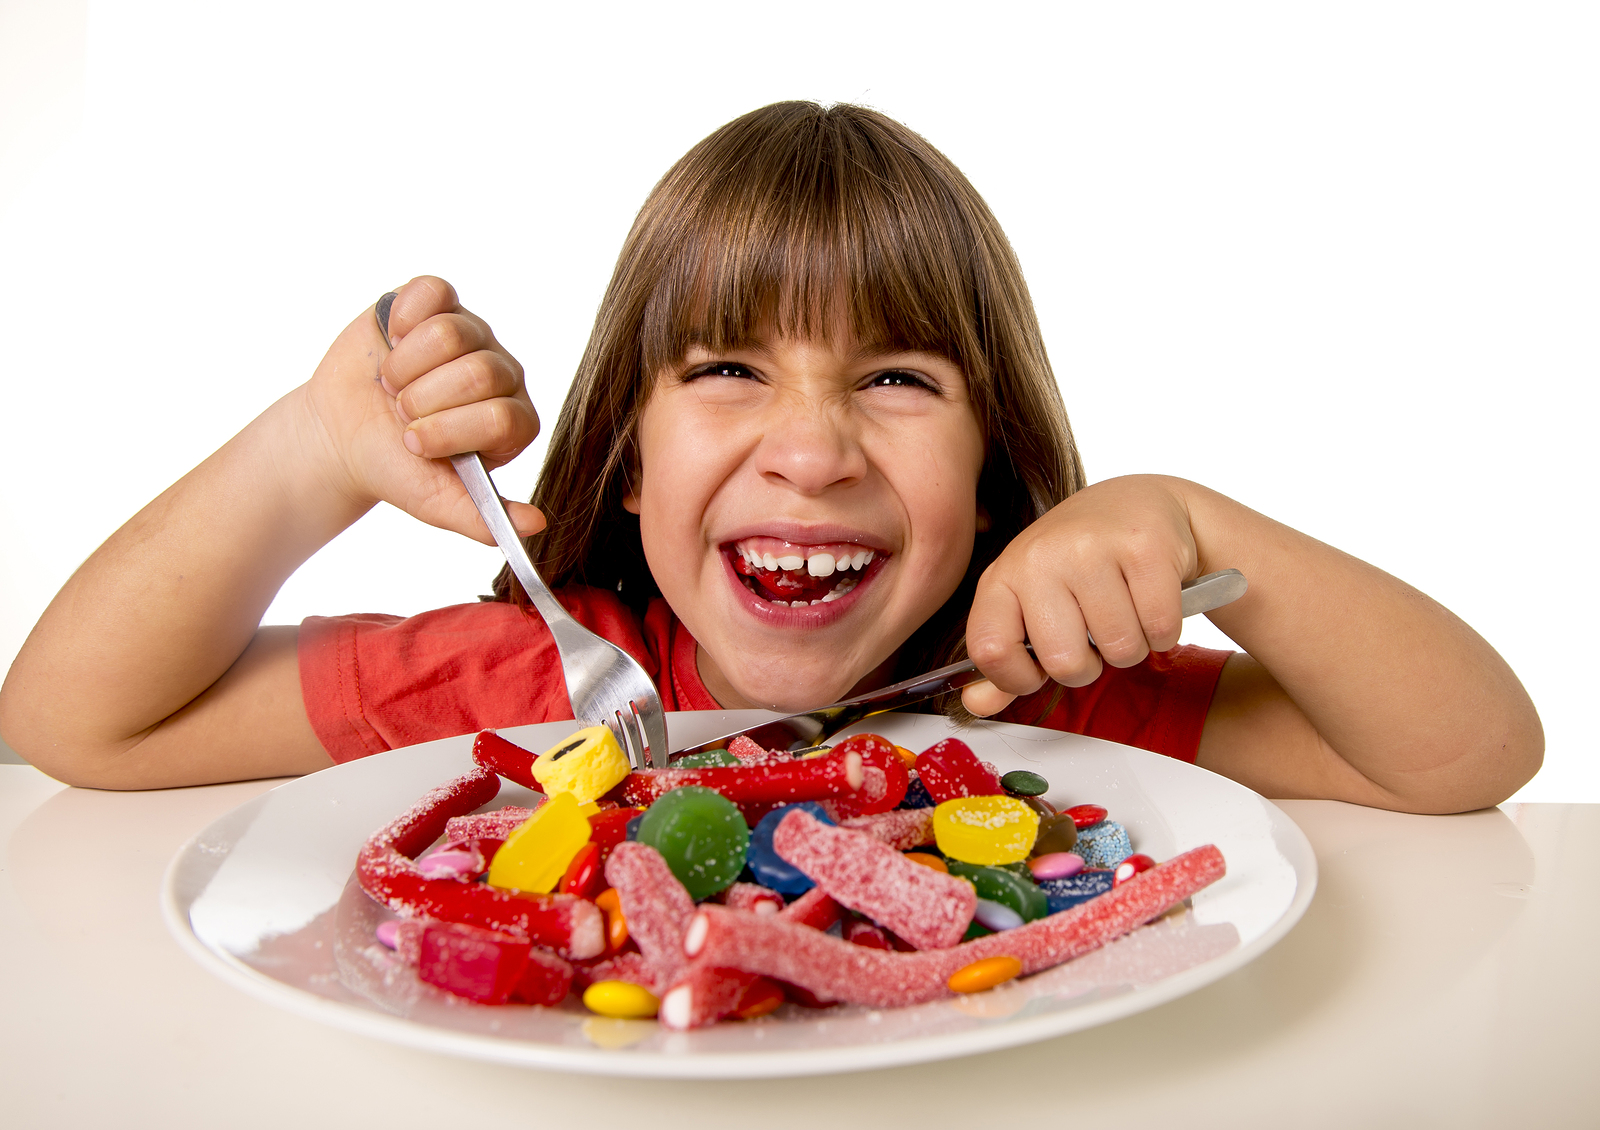 Child Eating Candy Like Crazy In Sugar Abuse And Unhealthy Sweet ...